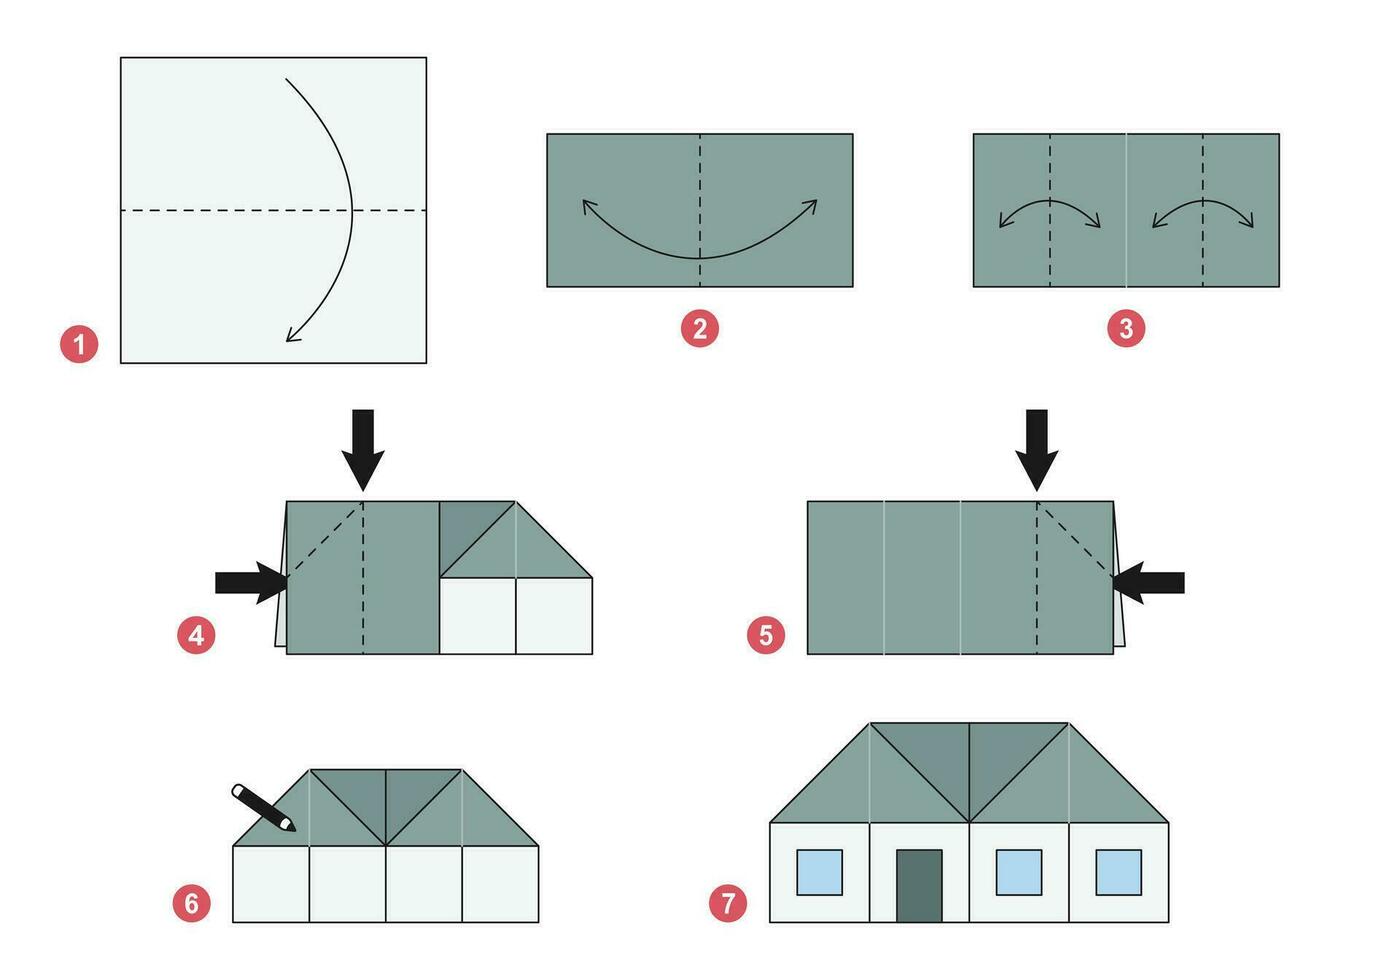 Small House origami scheme tutorial moving model. Origami for kids. Step by step how to make a cute origami house. Vector illustration.